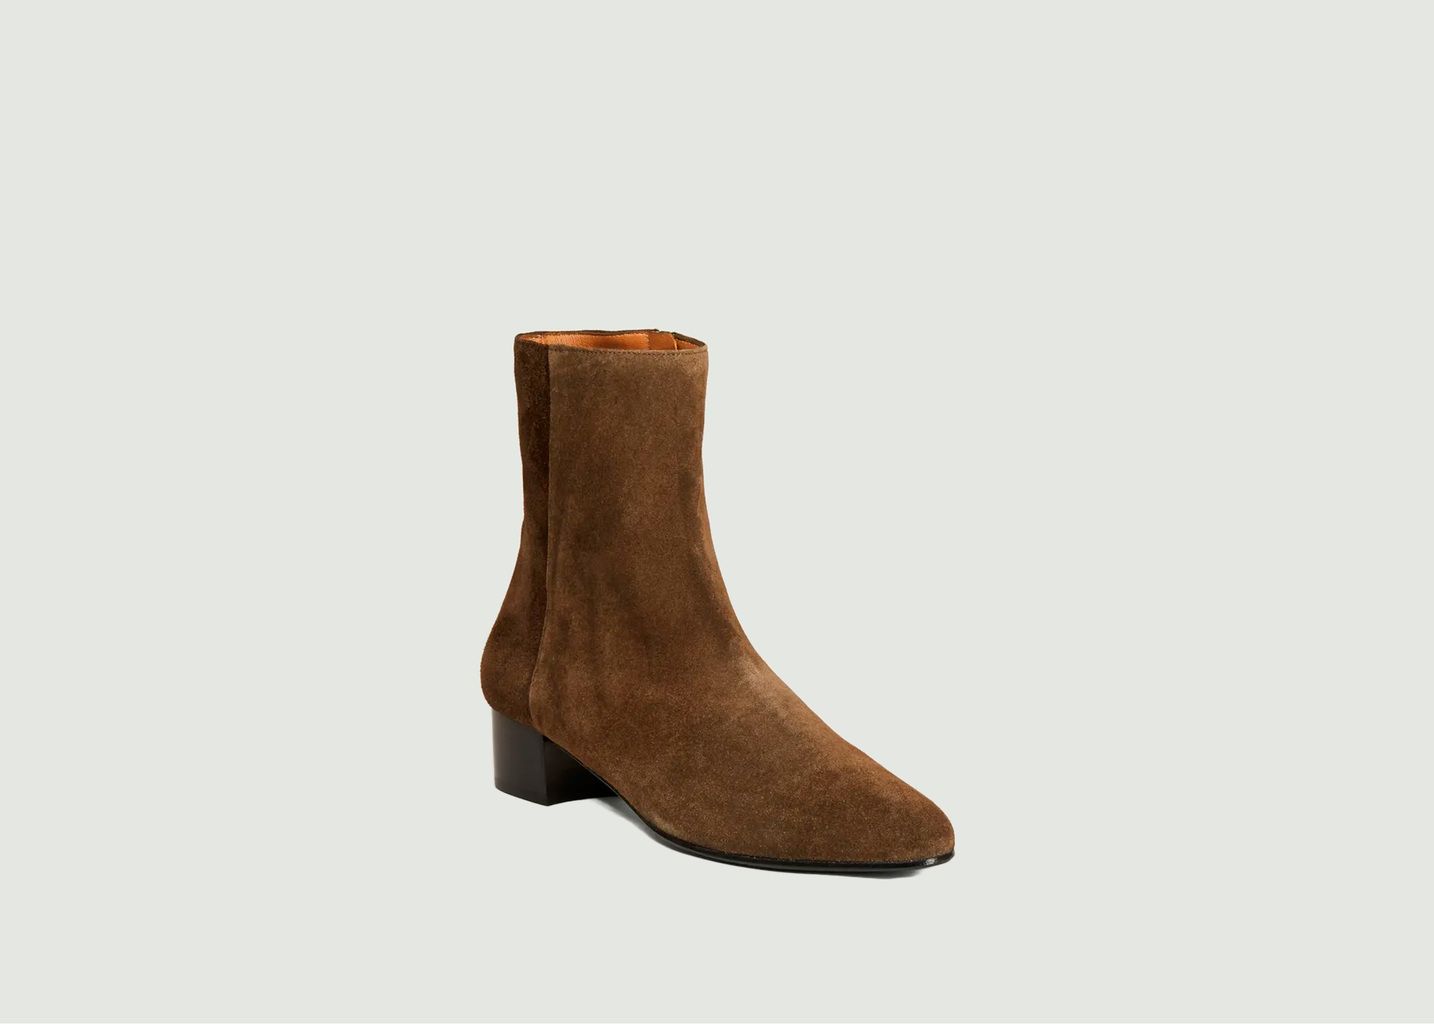 Michele suede leather boots - Anne Thomas Chaussures